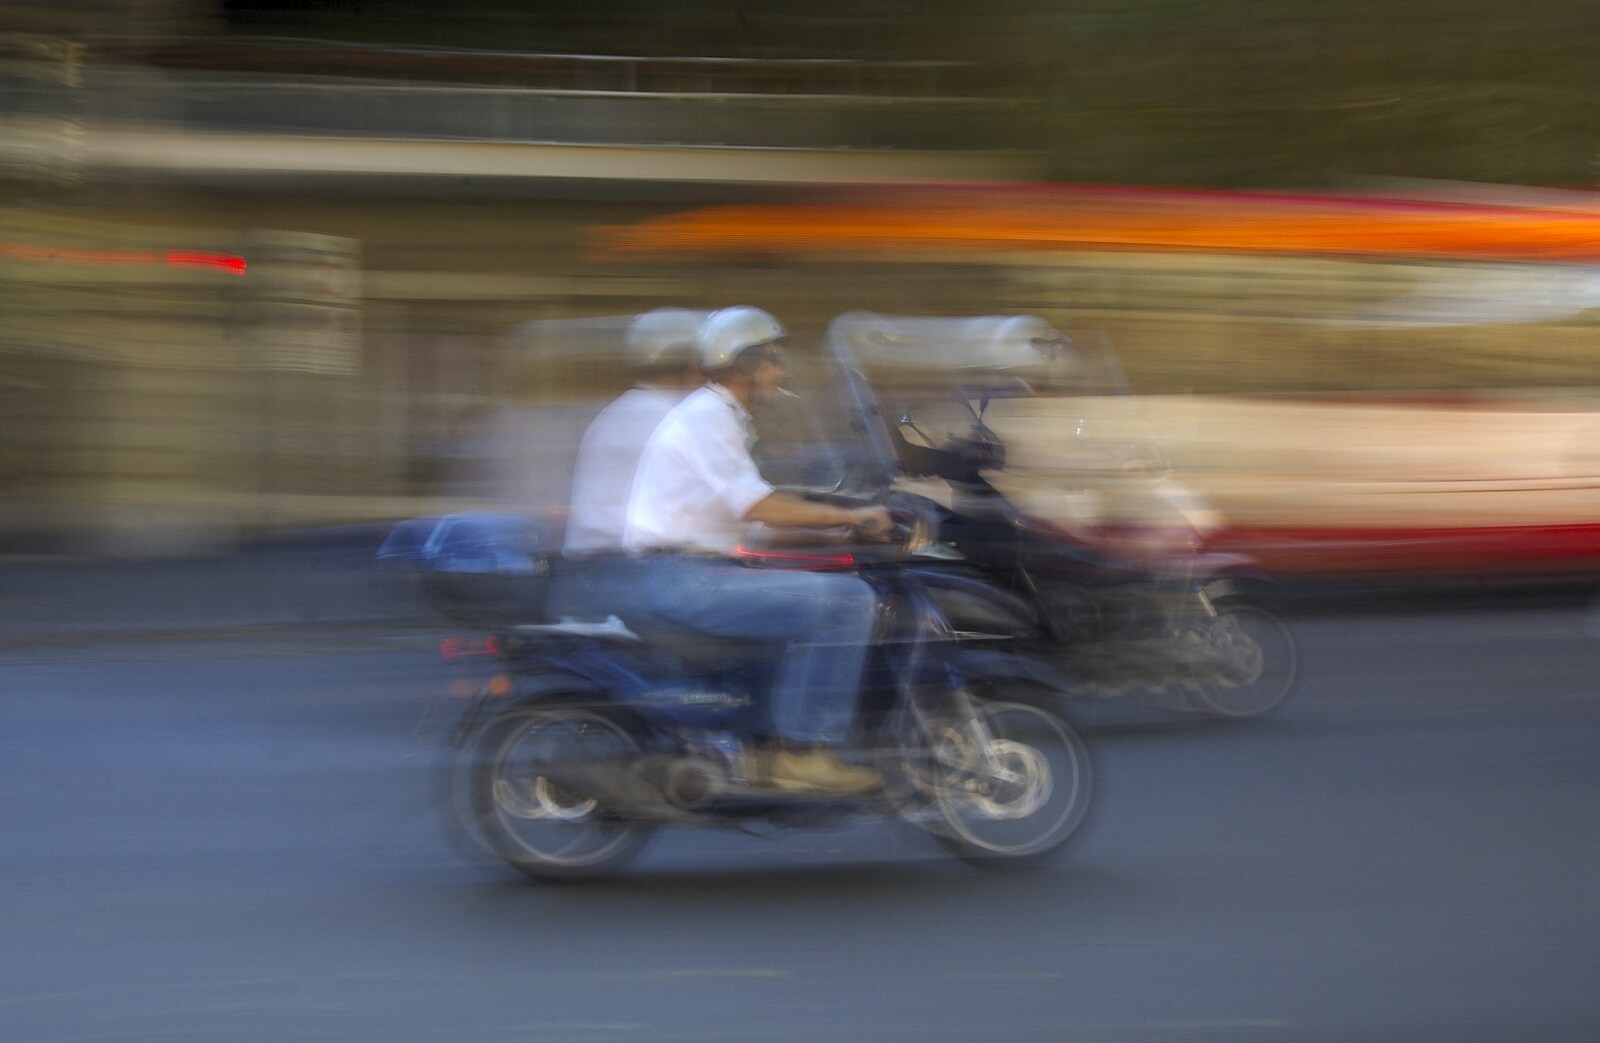 A nice accidental slow shot of the moped massive from A Sojourn in The Eternal City, Rome, Italy - 22nd July 2008